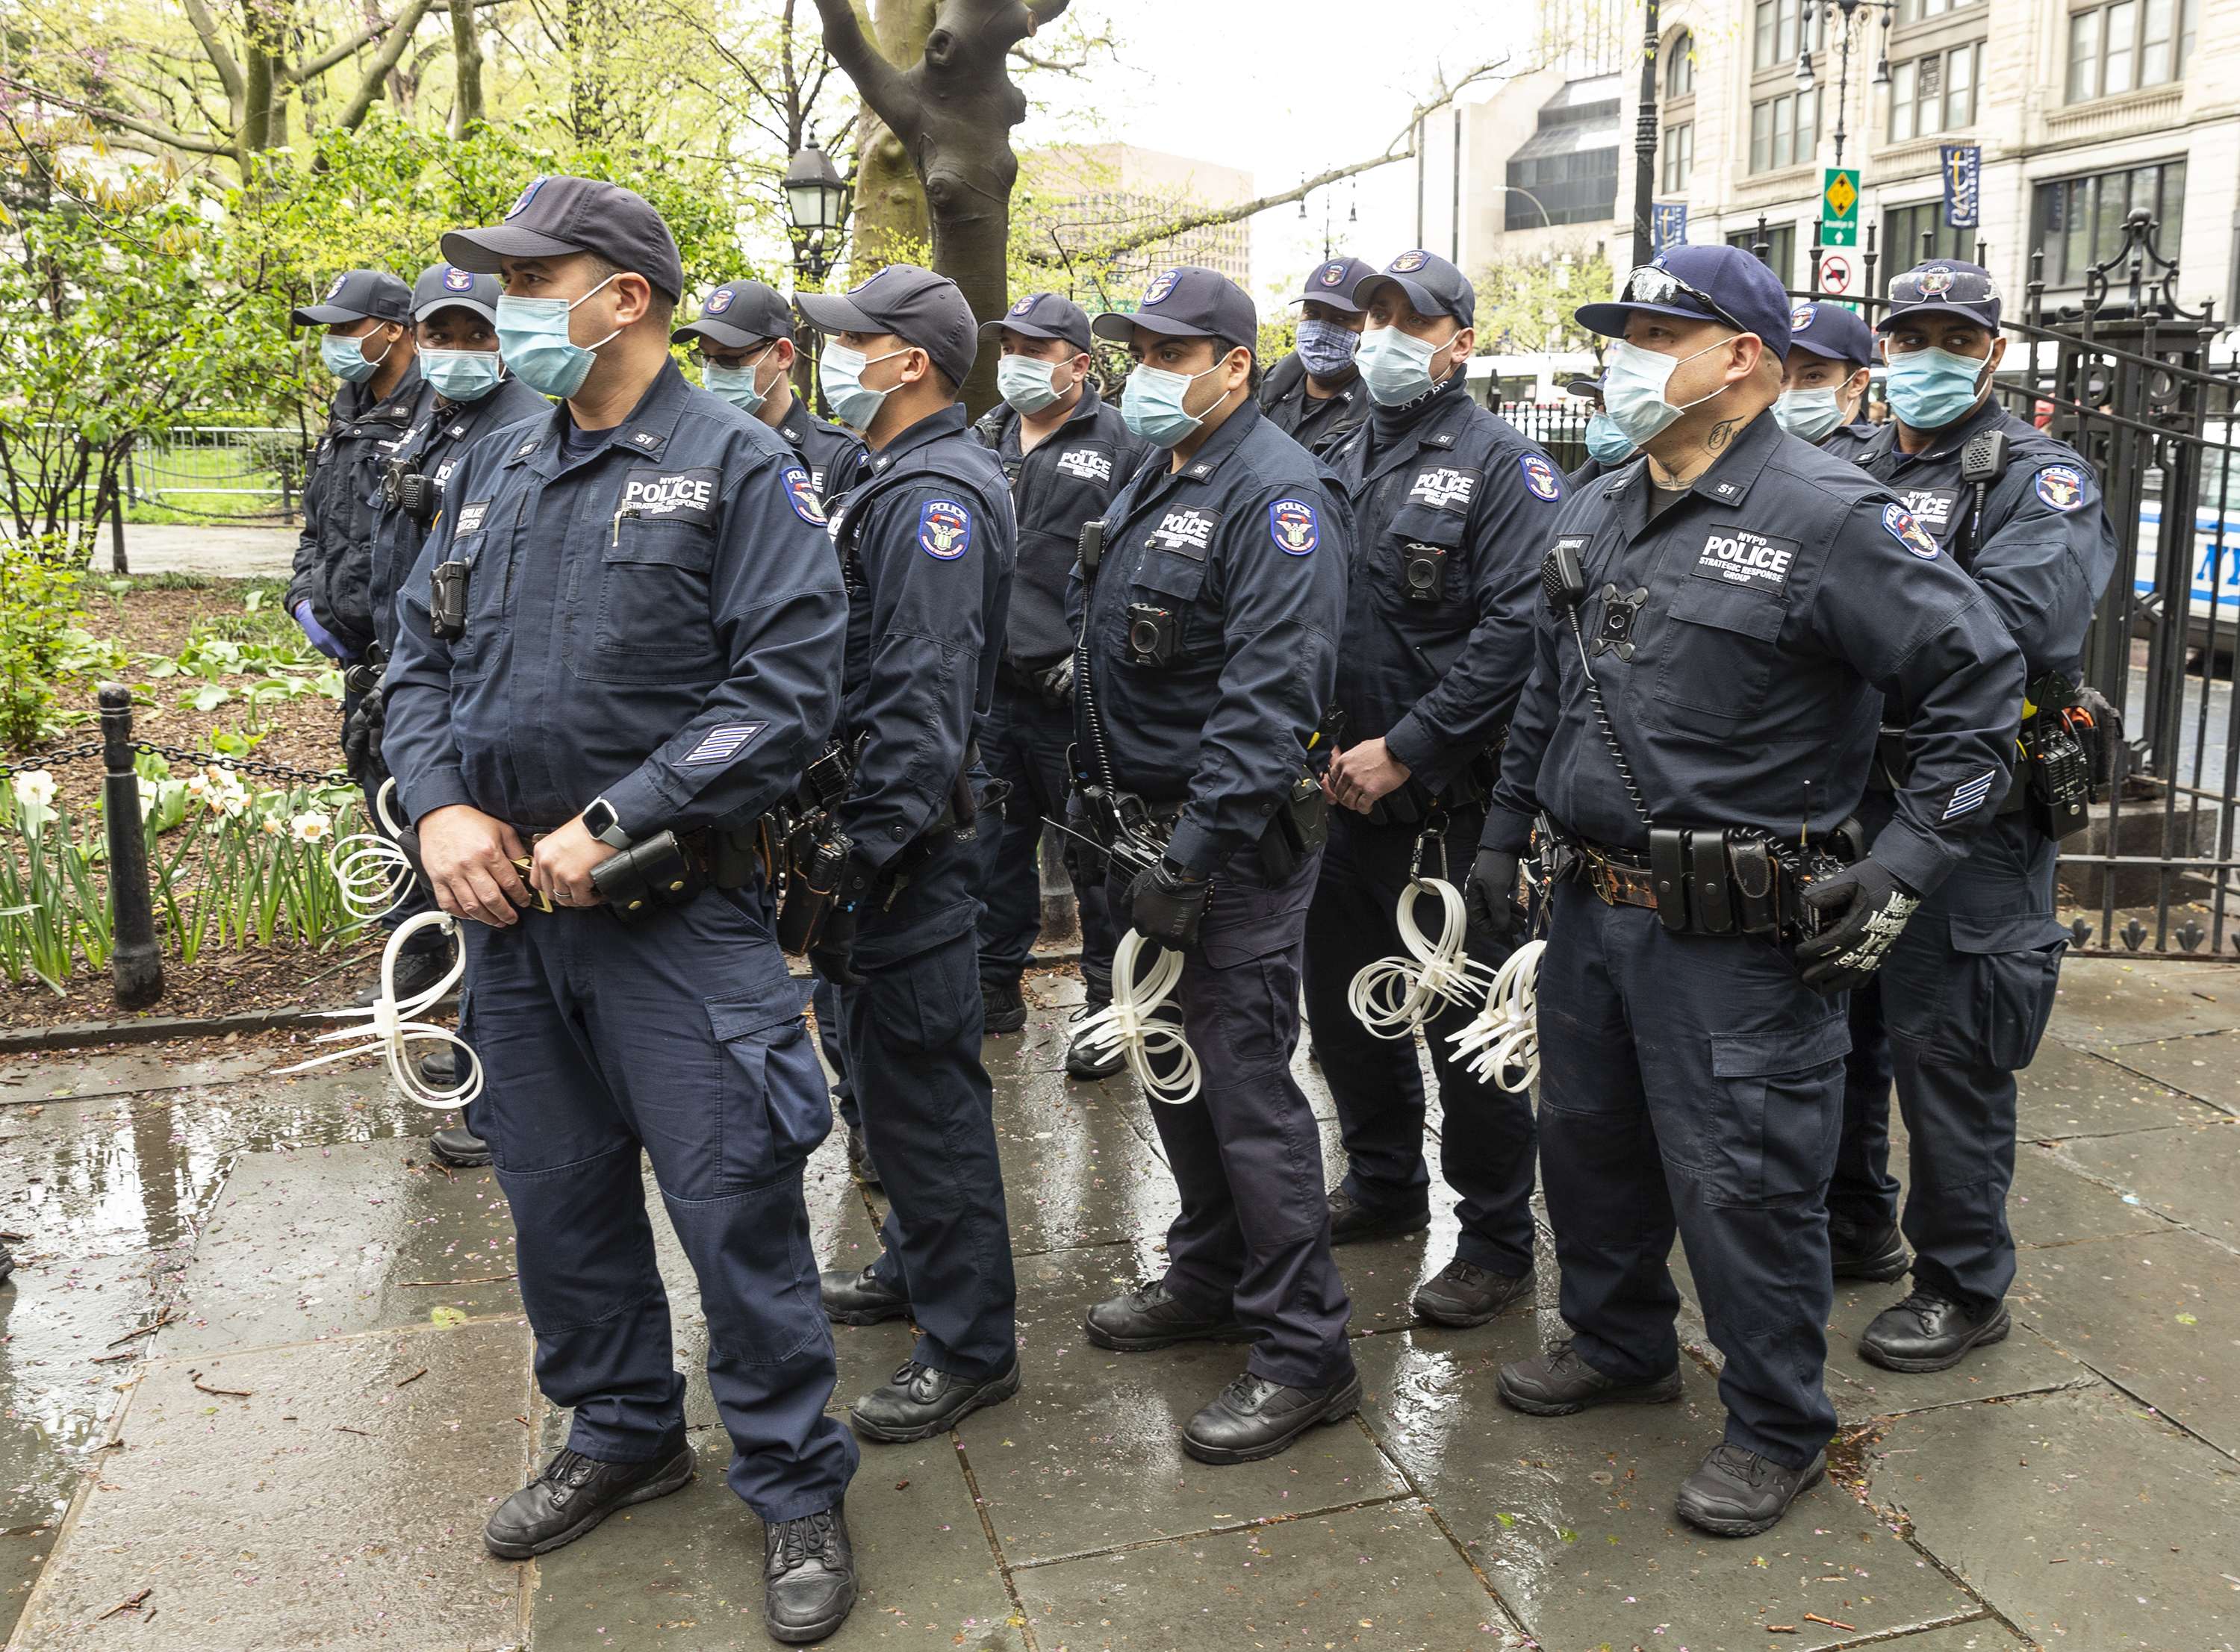 Police officers watch as activists hold small Make America Great Again (MAGA) rally in City Hall Park advocating for reopening New York state regardless of COVID-19 pandemic. (Lev Radin—Pacific Press/Getty Images)